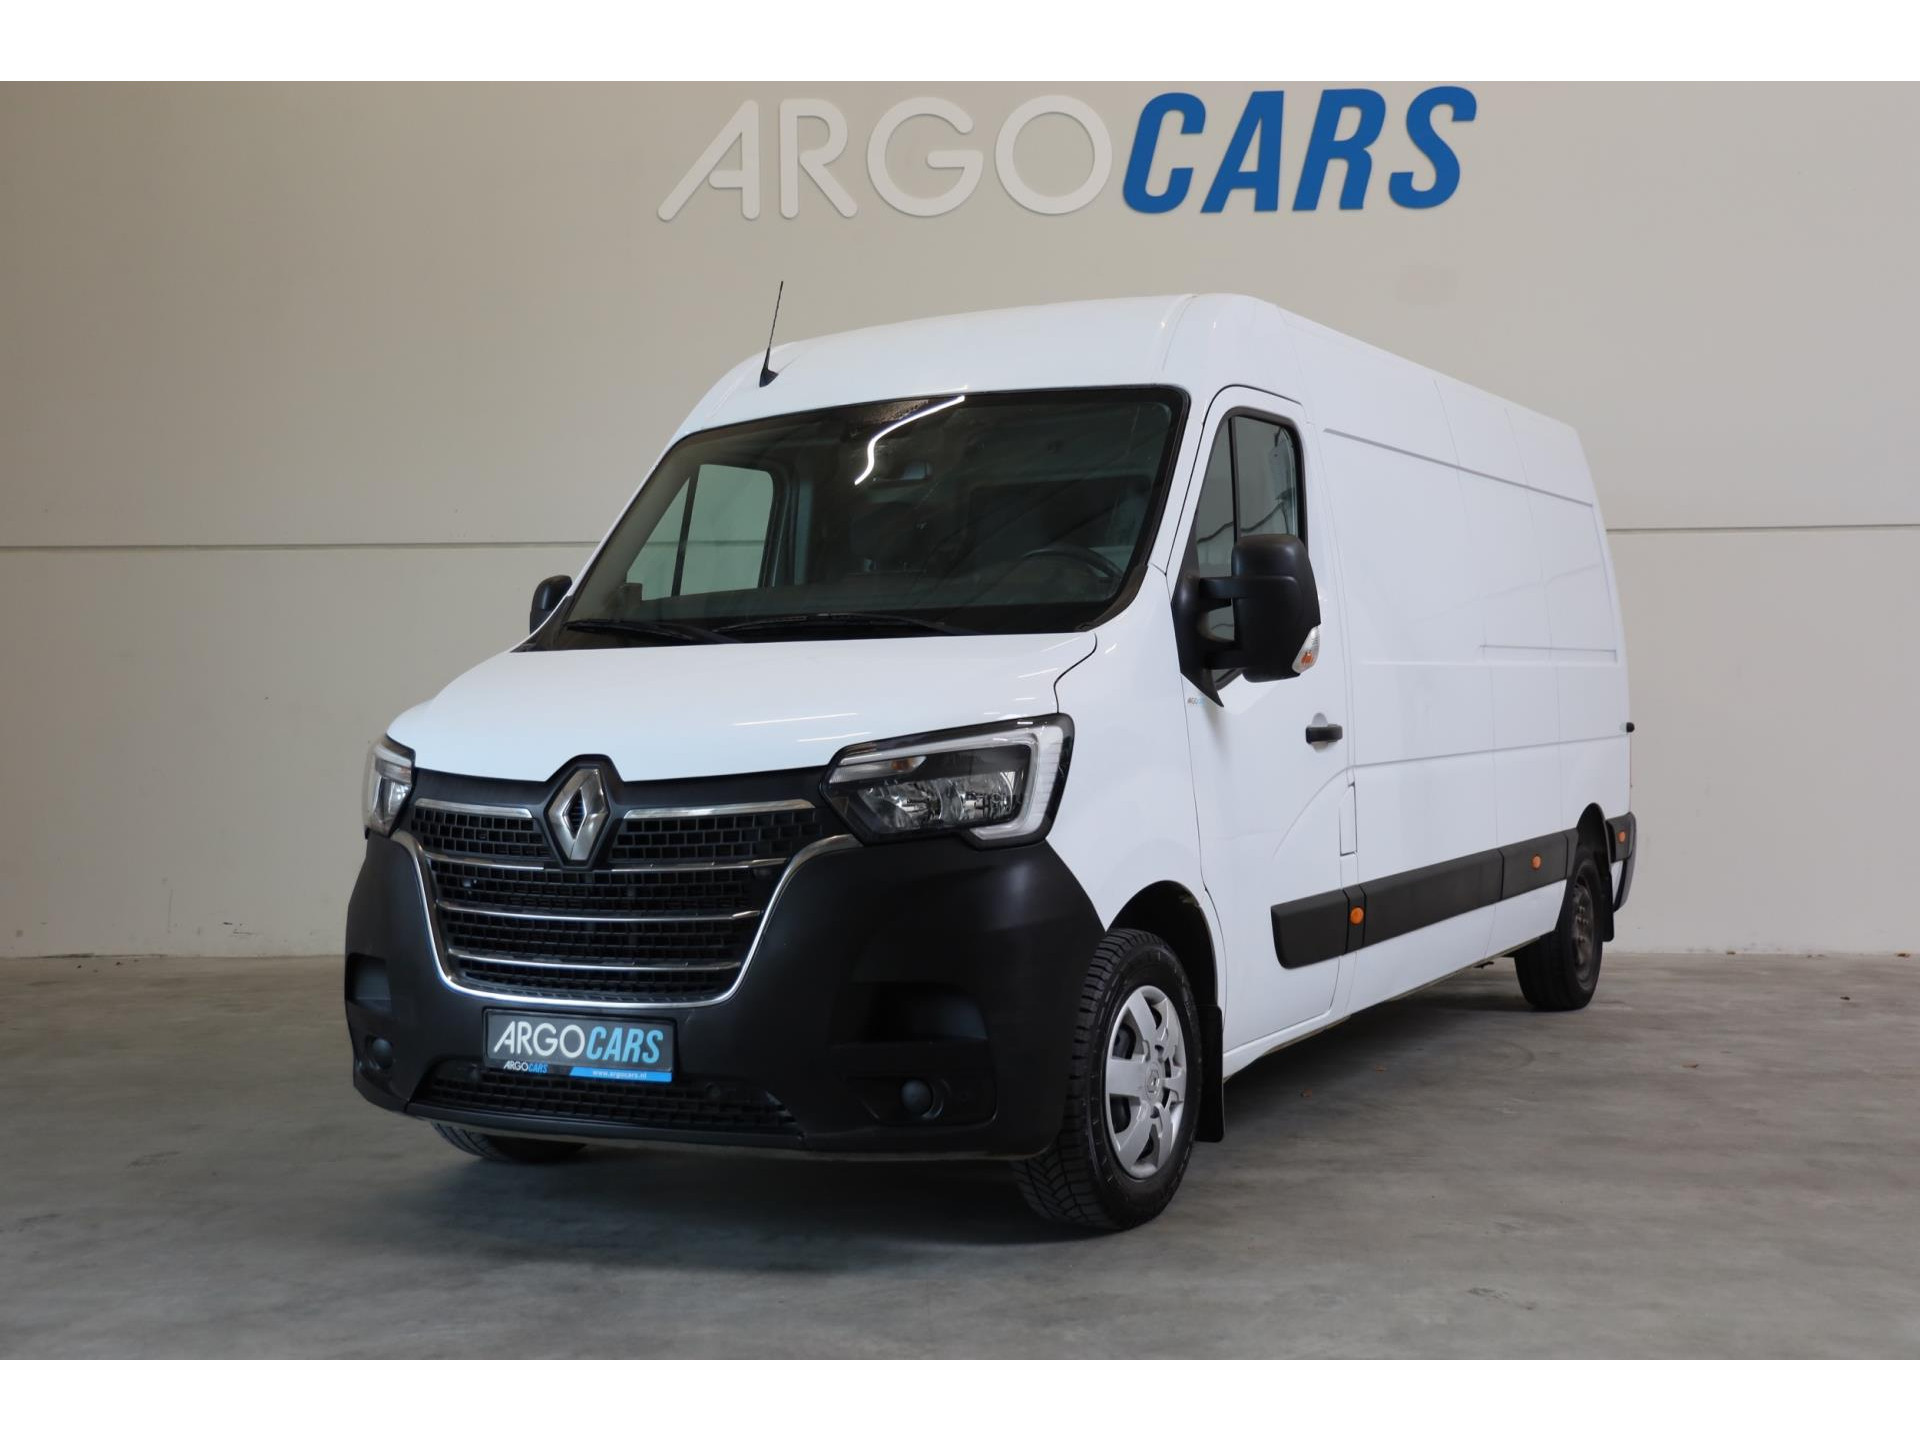 Renault Master T35 2.3 dCi 180PK L3/H2 CAMERA PDC AIRCO TREKHAAK CRUISE CONTROL LEASE V/A €188,- P.M. INRUIL MOGELIJK Bestelauto